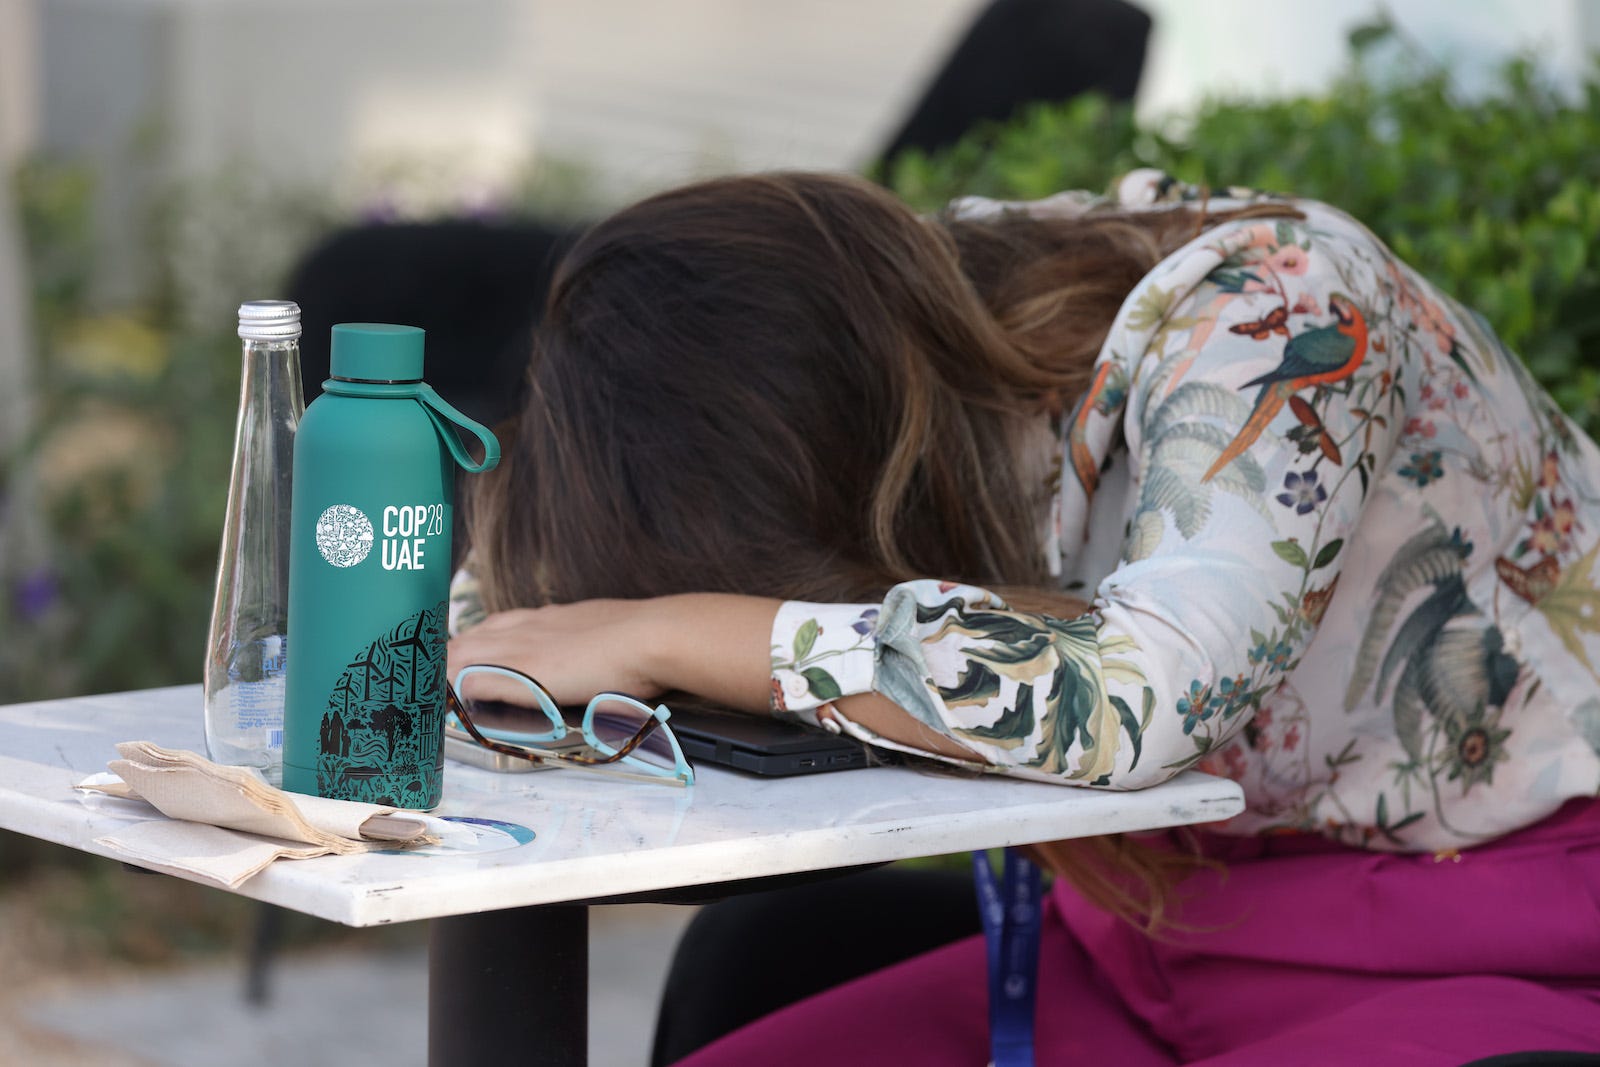 A woman lays her head on a faux marble desk during a break in COP28 for a nap. Only her brown hair, glasses, and green COP28 UAE water bottle can be seen.